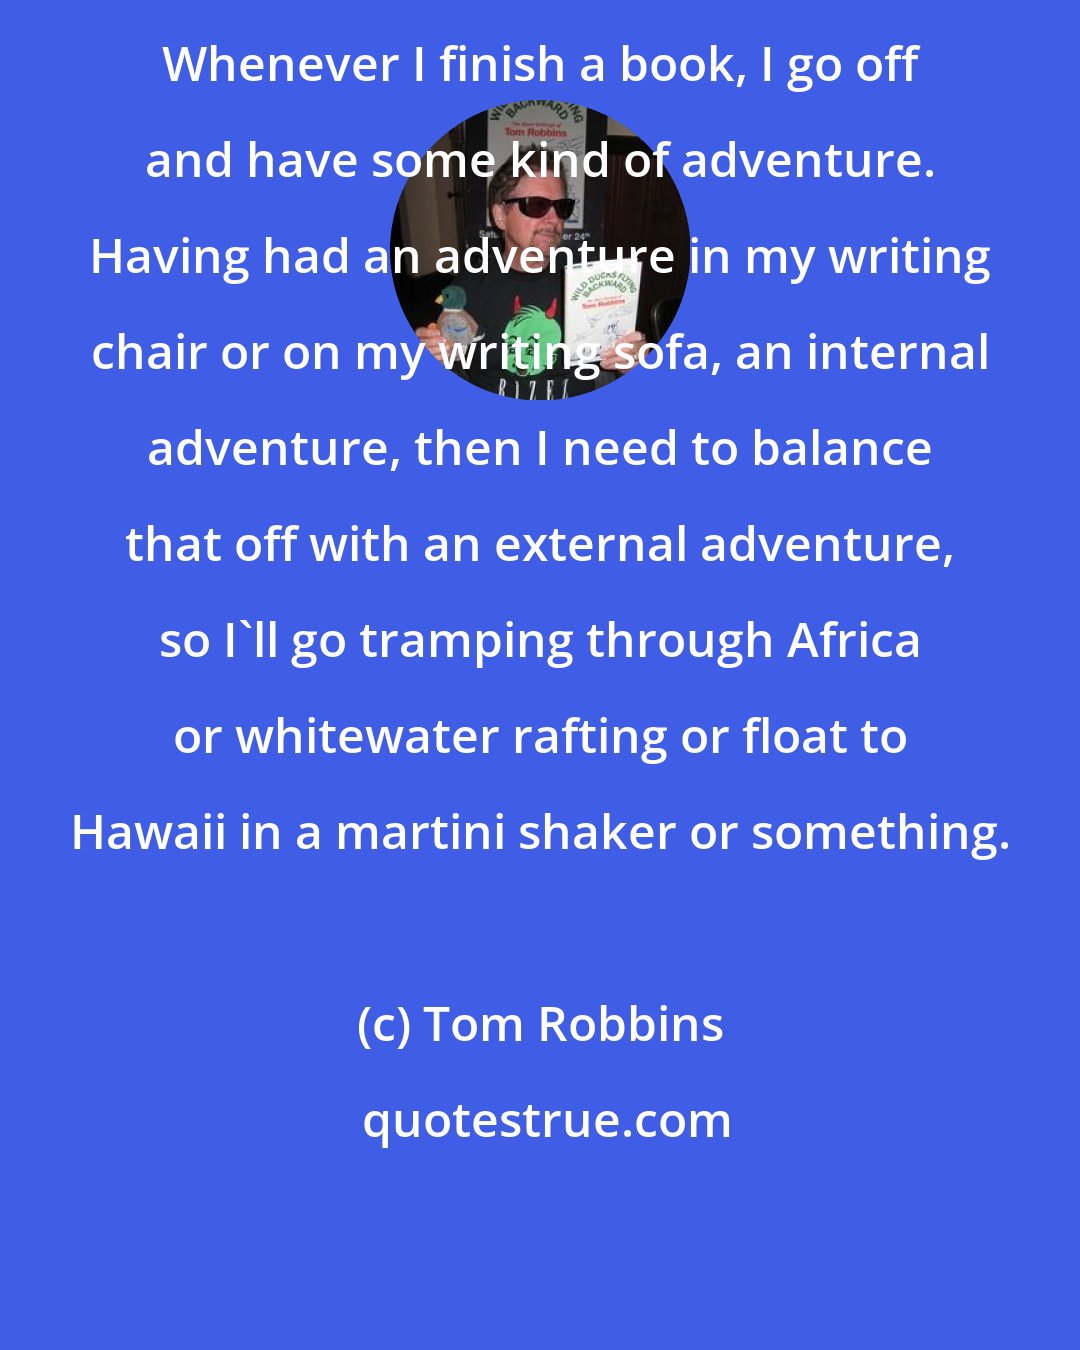 Tom Robbins: Whenever I finish a book, I go off and have some kind of adventure. Having had an adventure in my writing chair or on my writing sofa, an internal adventure, then I need to balance that off with an external adventure, so I'll go tramping through Africa or whitewater rafting or float to Hawaii in a martini shaker or something.